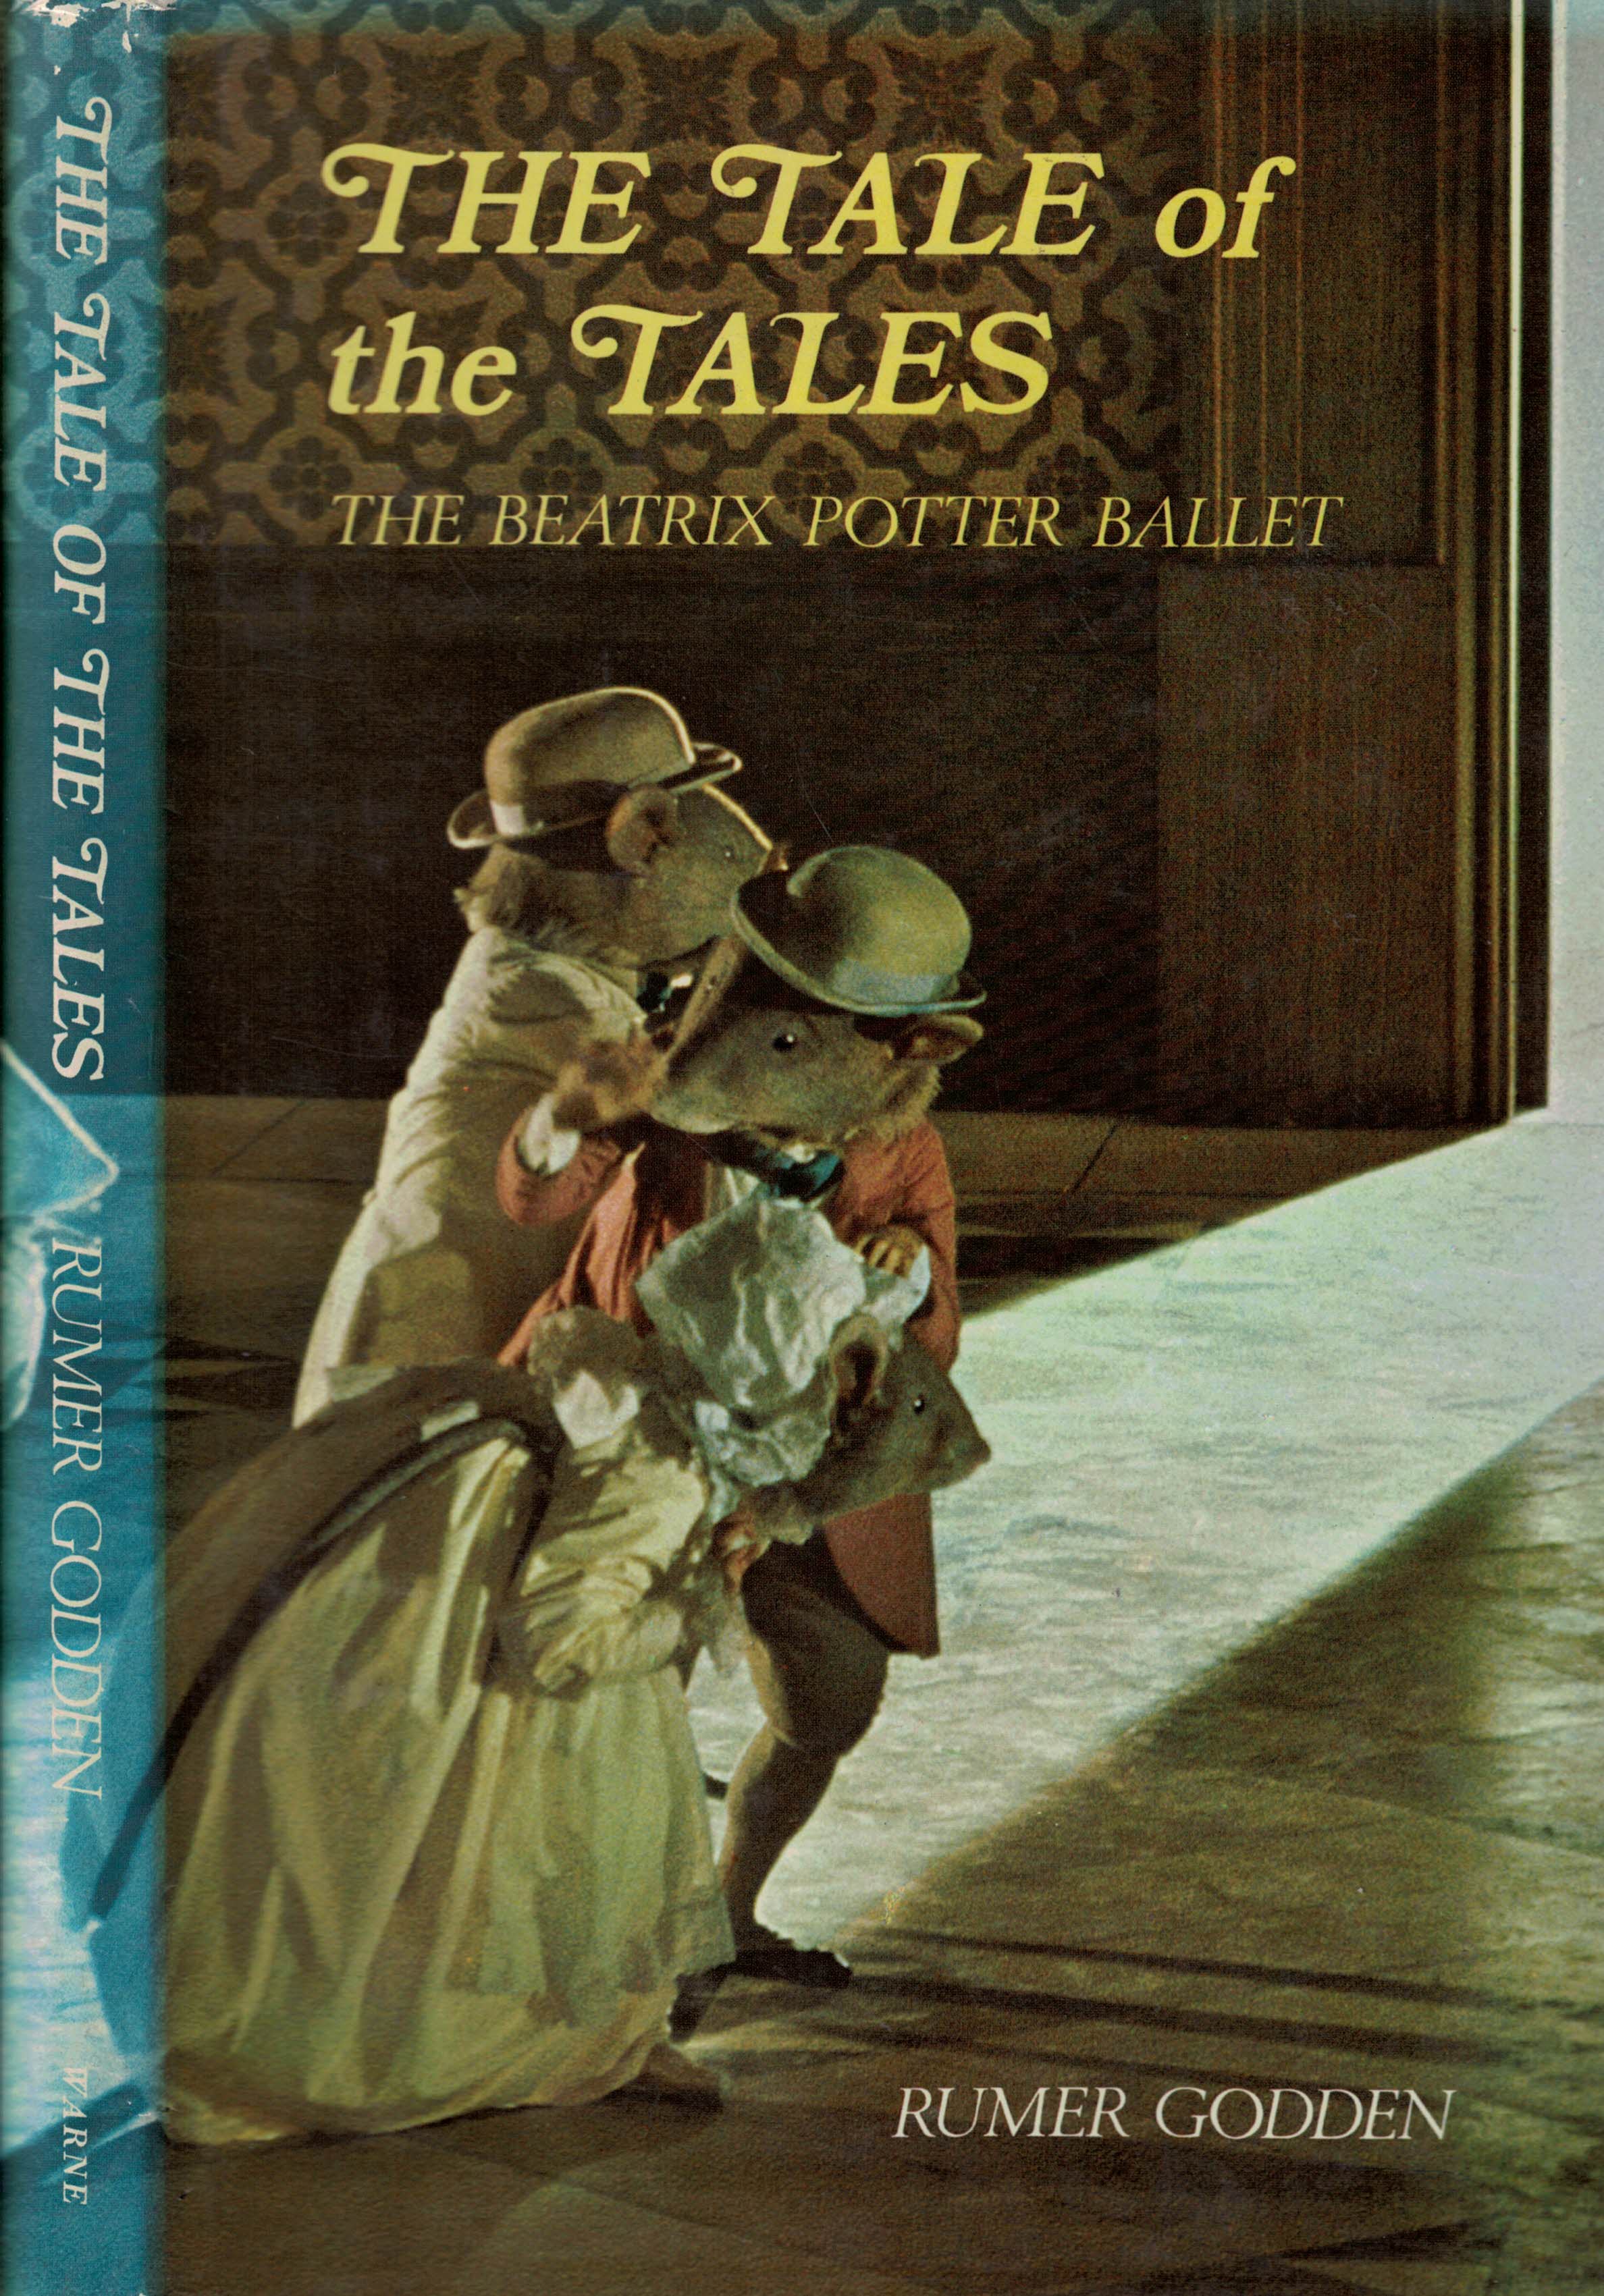 The Tale of the Tales. The Beatrix Potter Ballet.